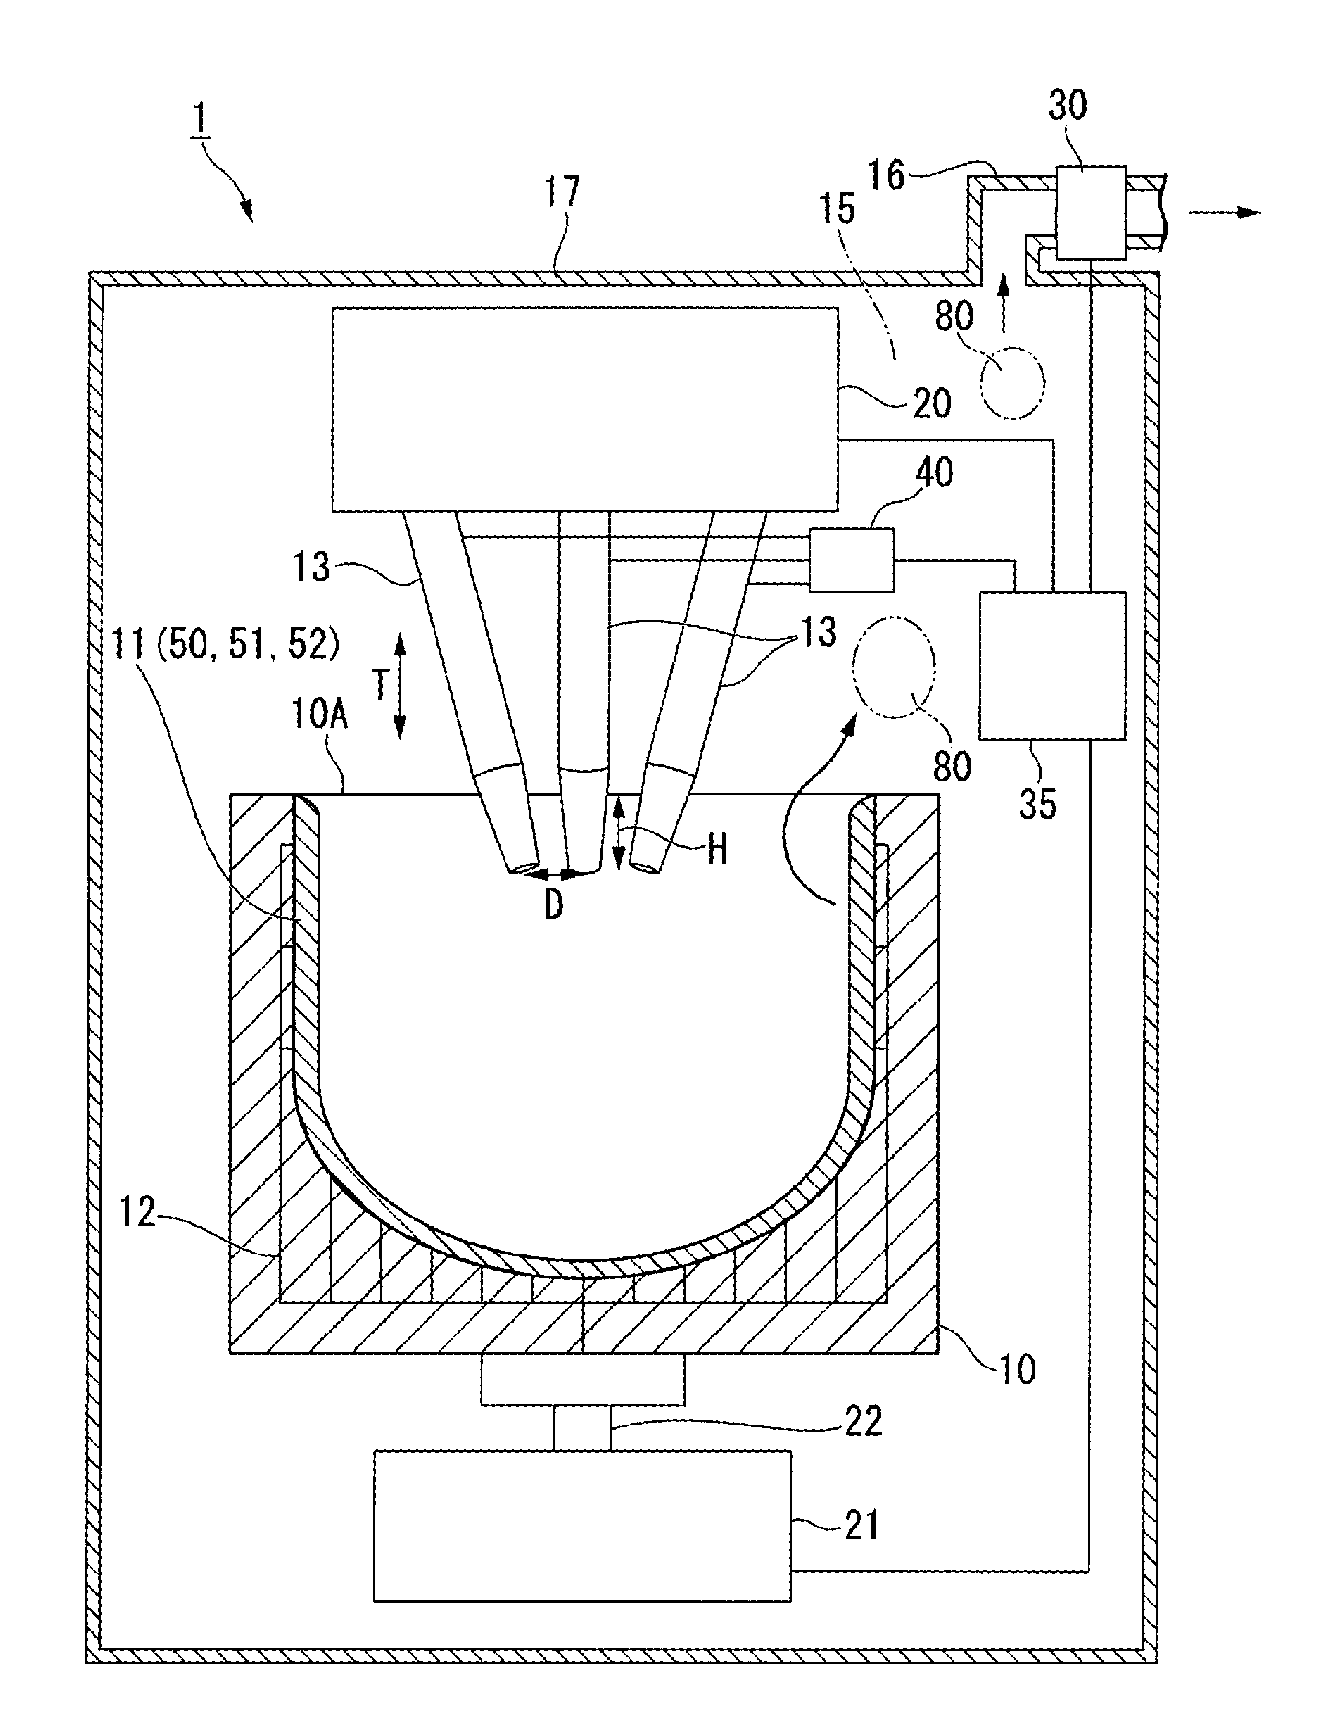 Apparatus and method for manufacturing vitreous silica crucible